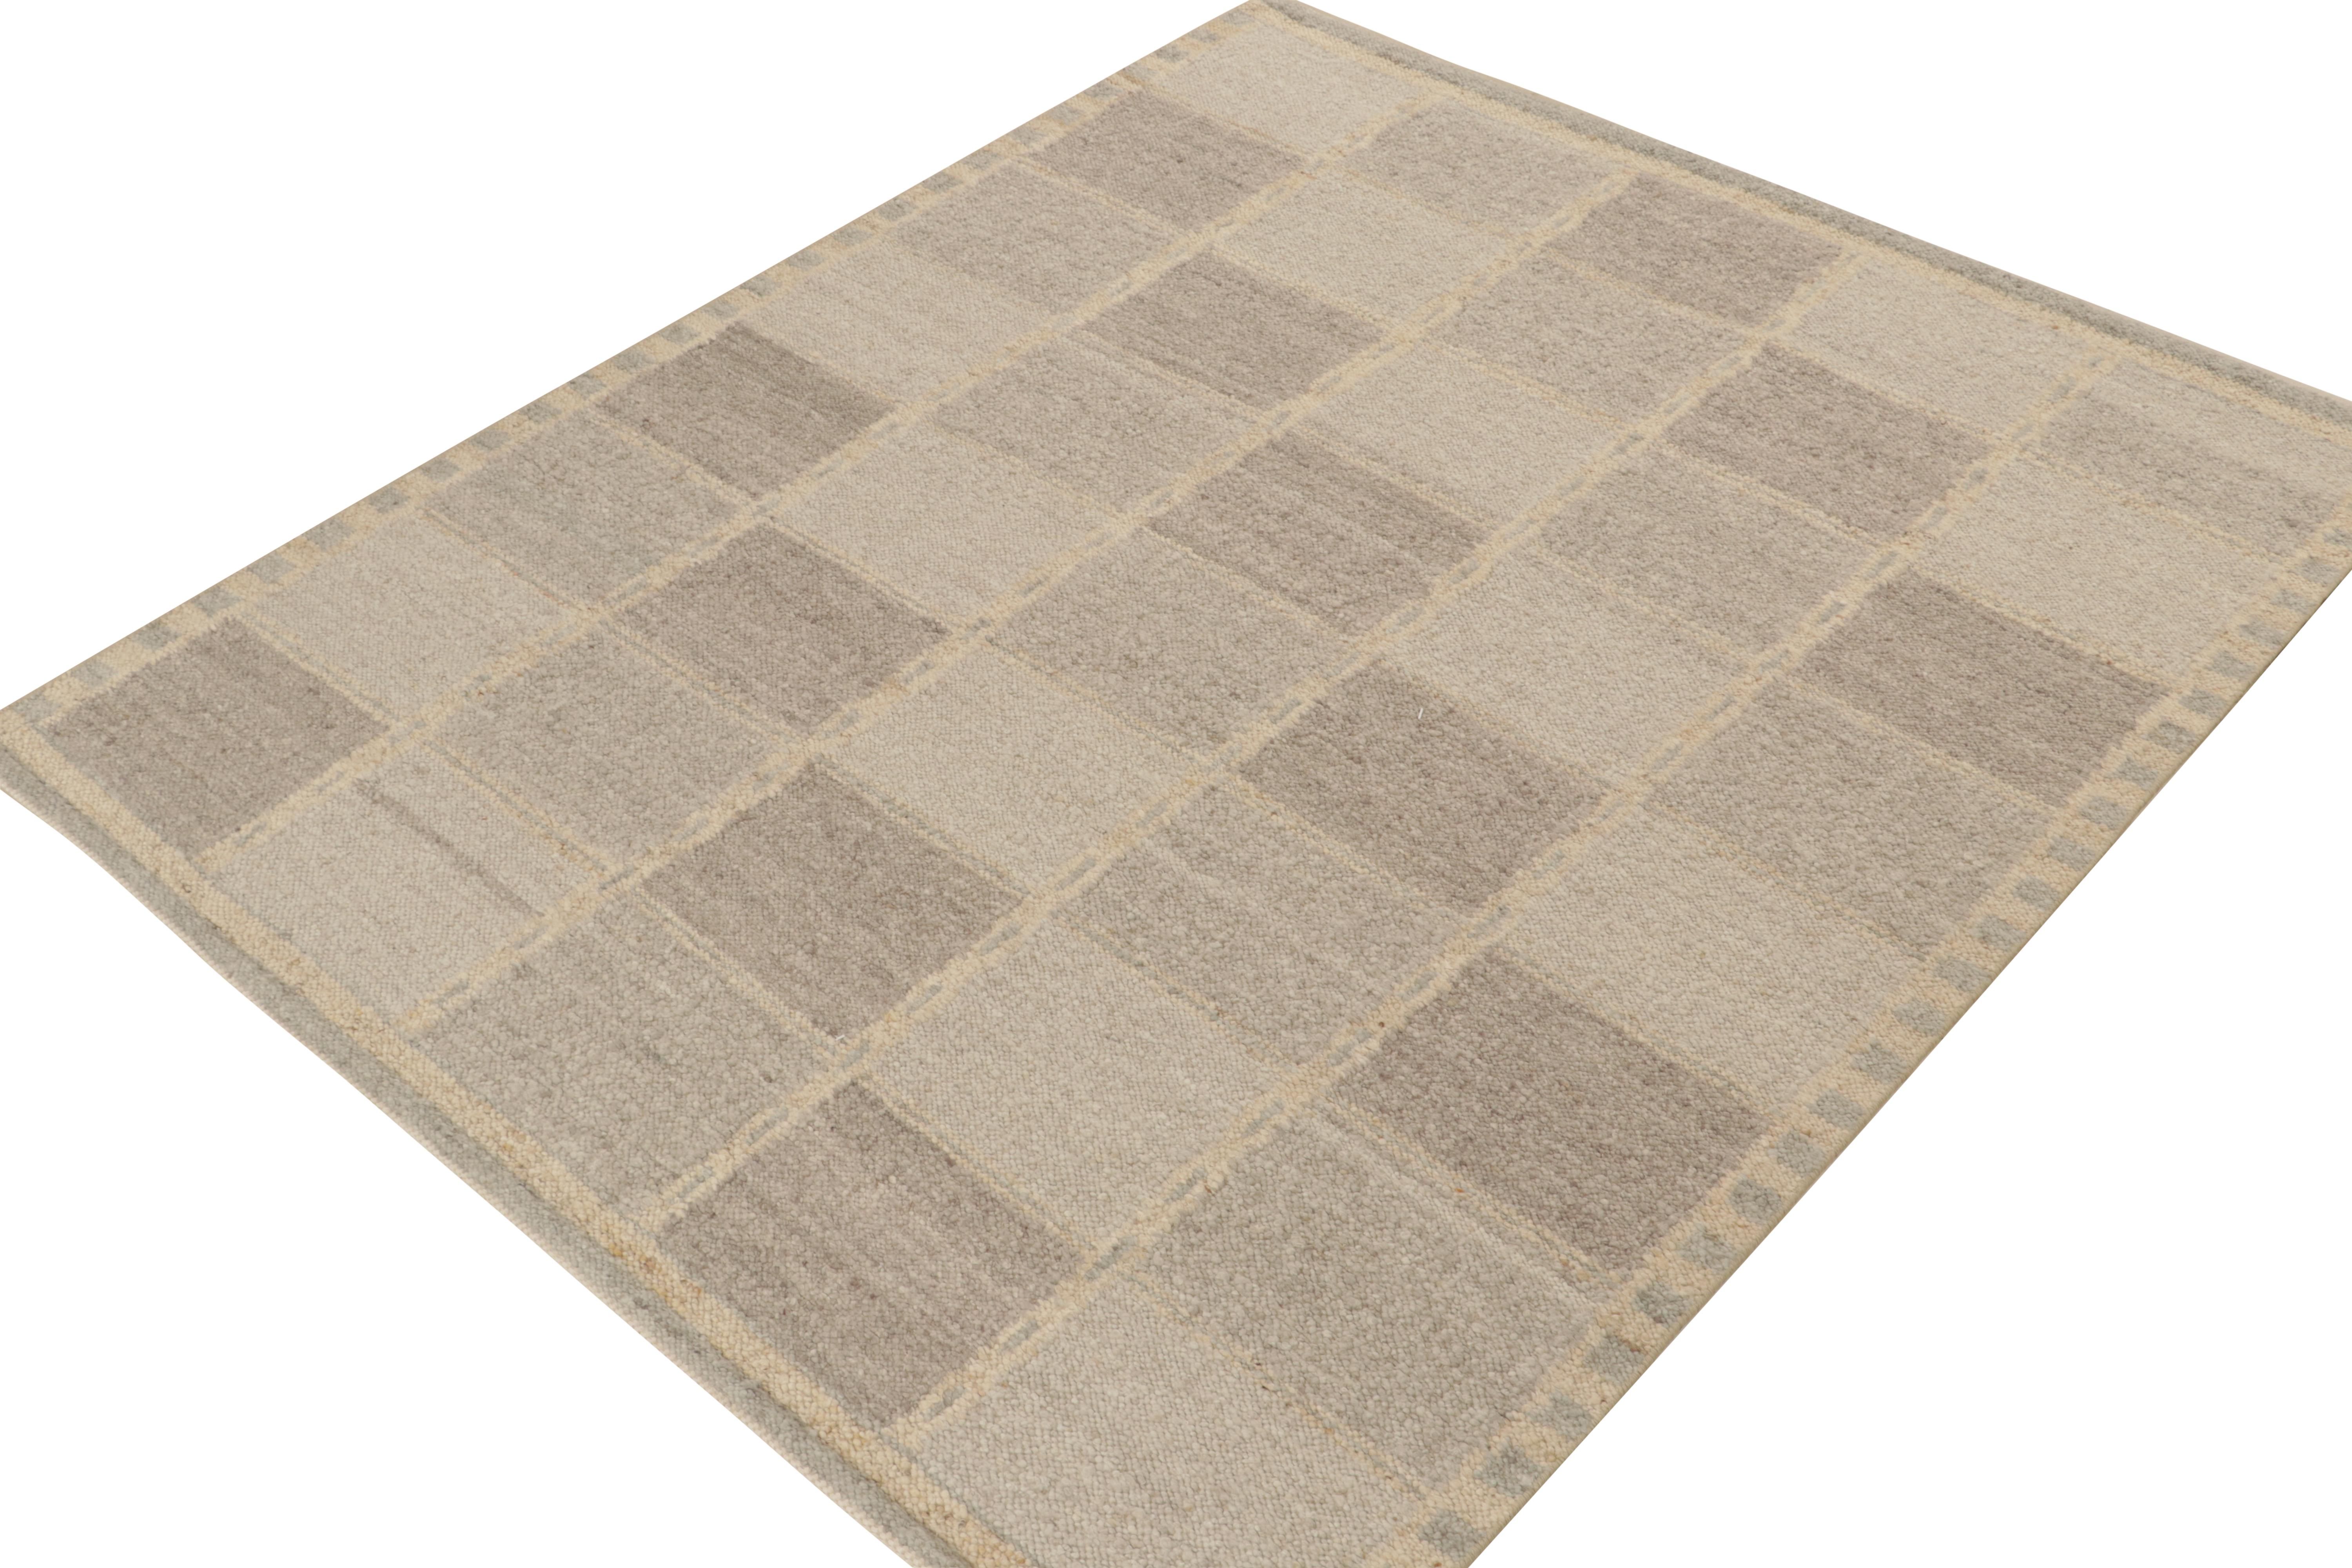 A smart 8x11 Swedish style kilim rug from the new texture in our award-winning Scandinavian flat weave collection. Handwoven in wool and cotton. 

Further On the Design: 

Our “Nu” flat weave enjoys a boucle-like texture of blended yarns, and a